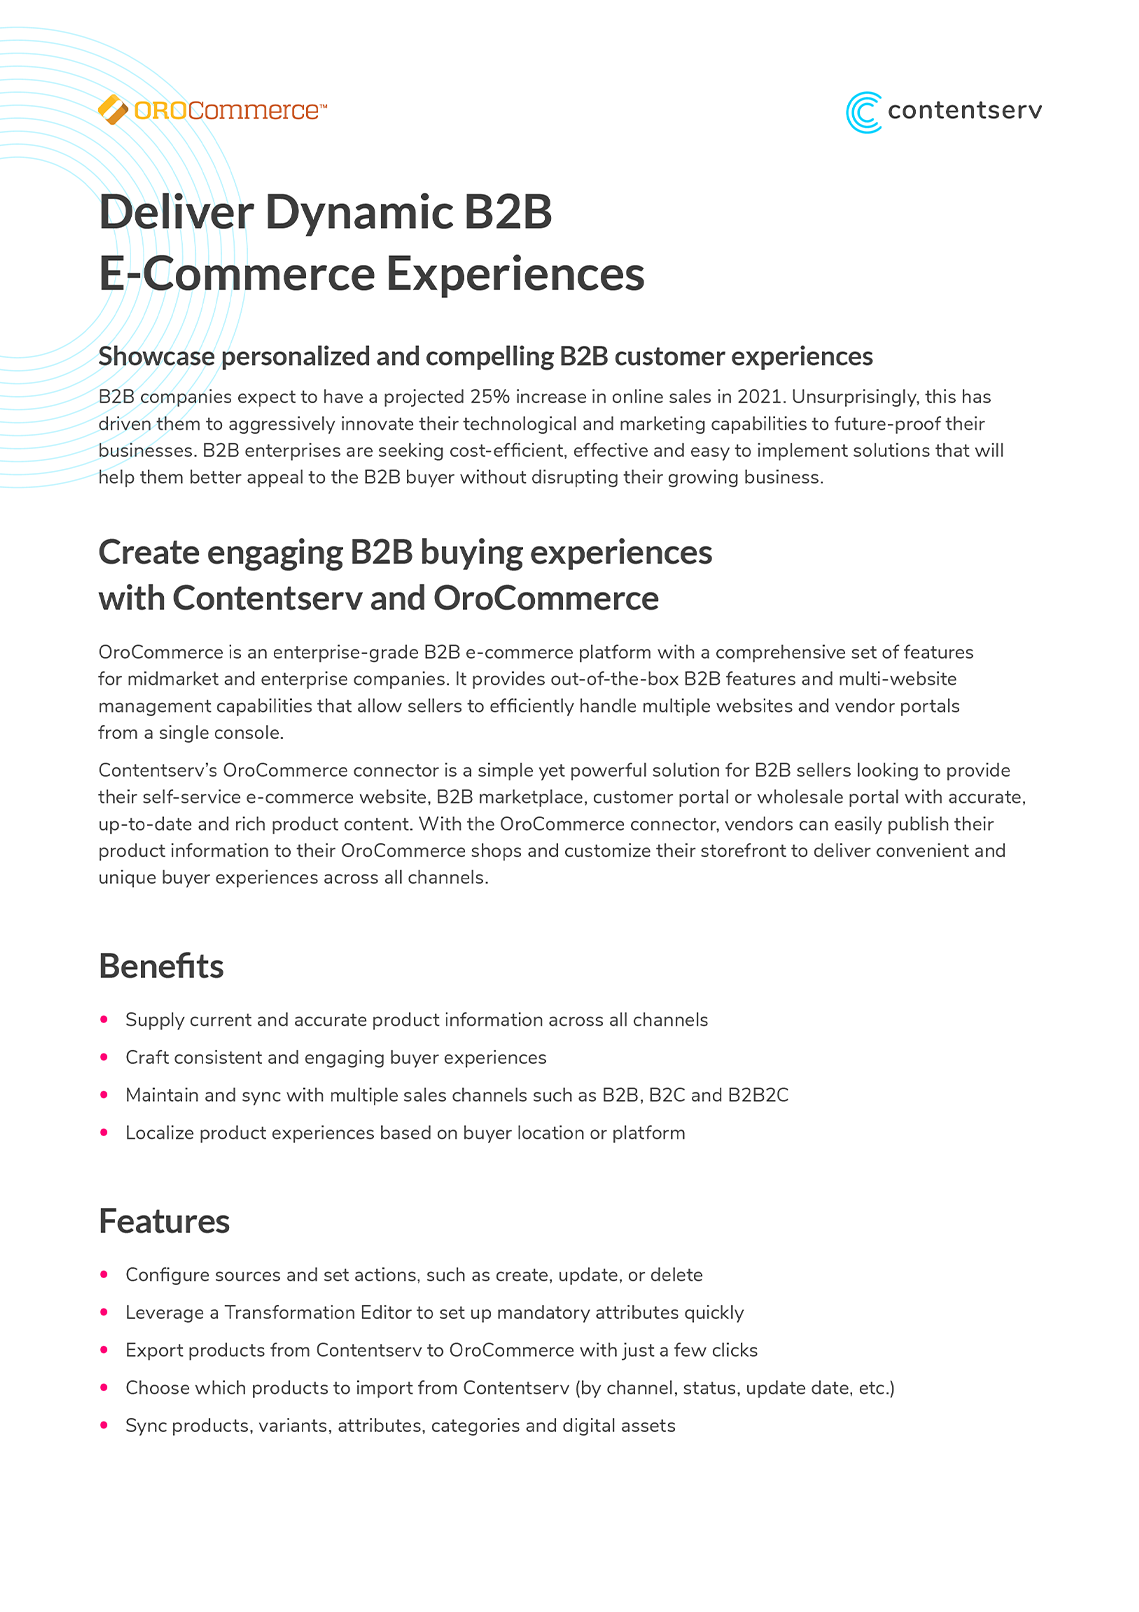 OroCommerce Connector: Delivering Dynamic B2B E-Commerce Experiences